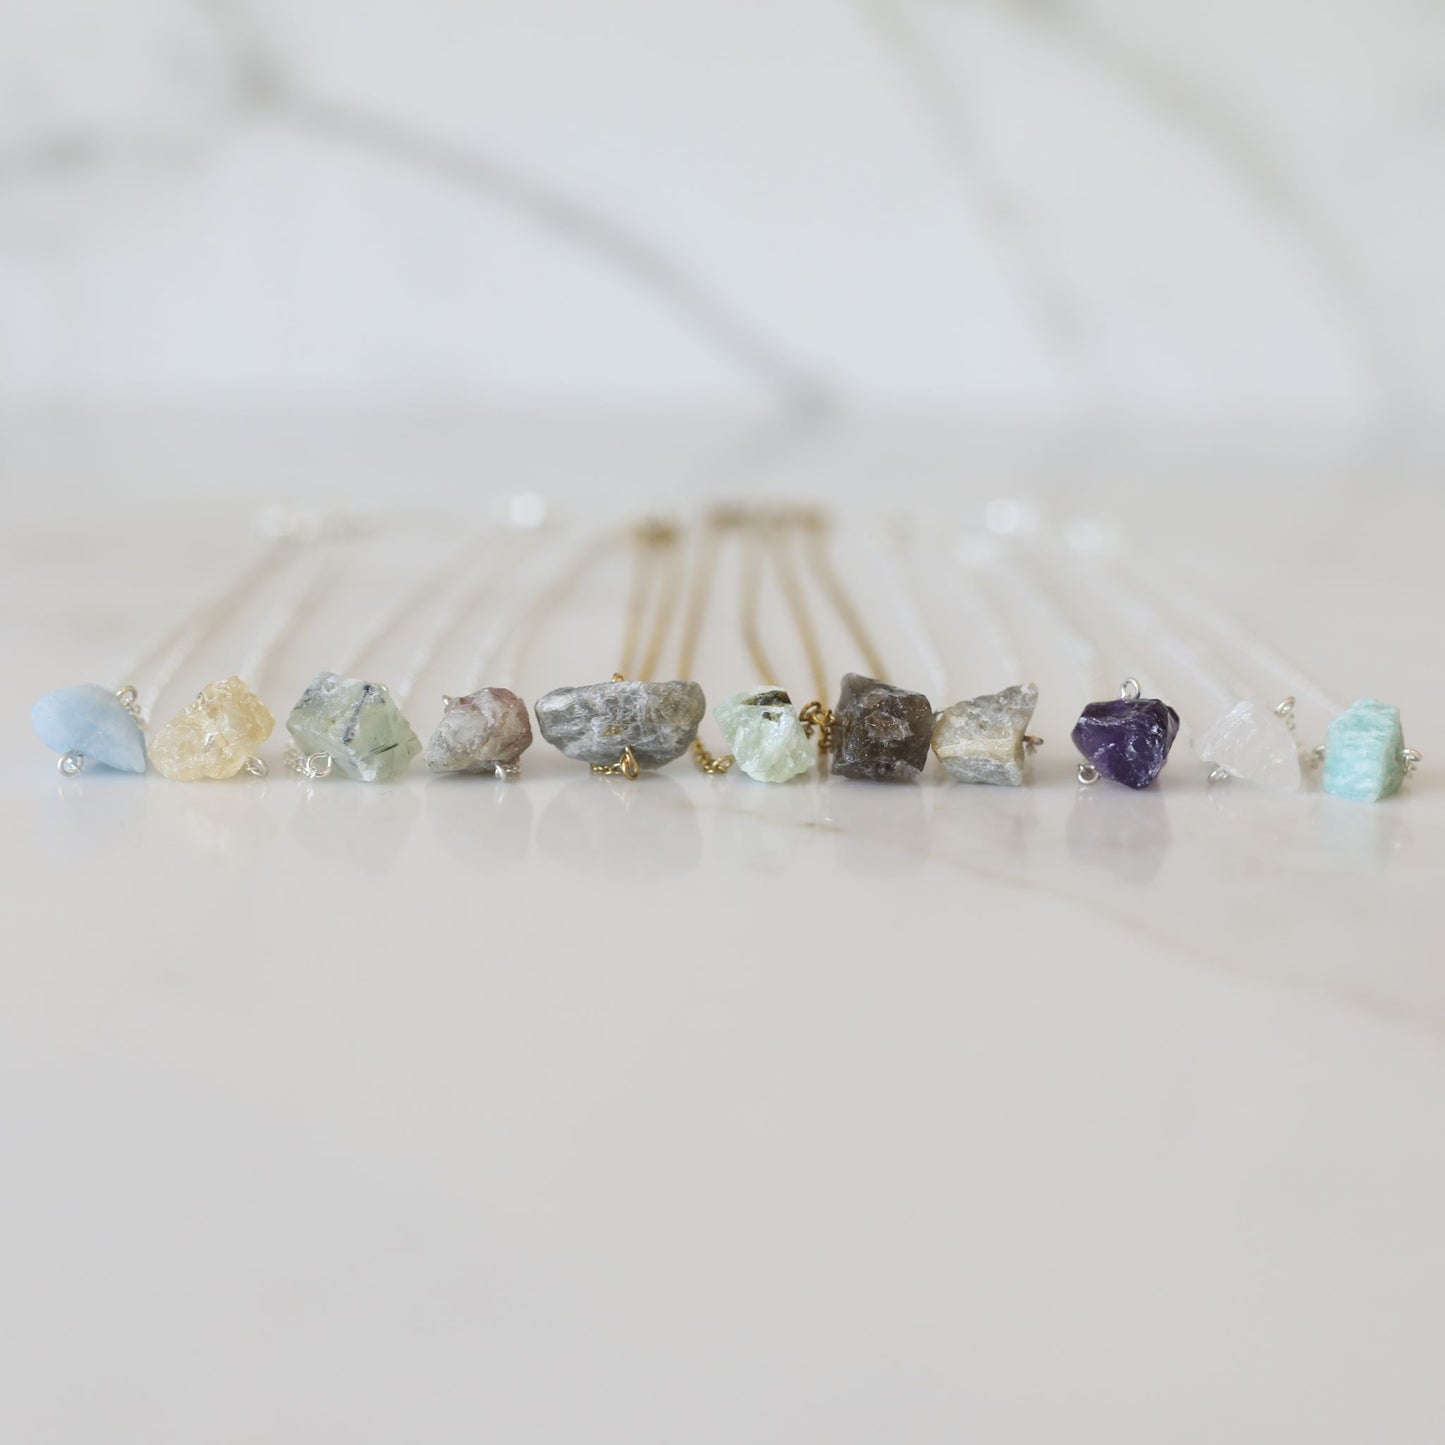 Raw Beauty Necklace made with Raw Gemstones